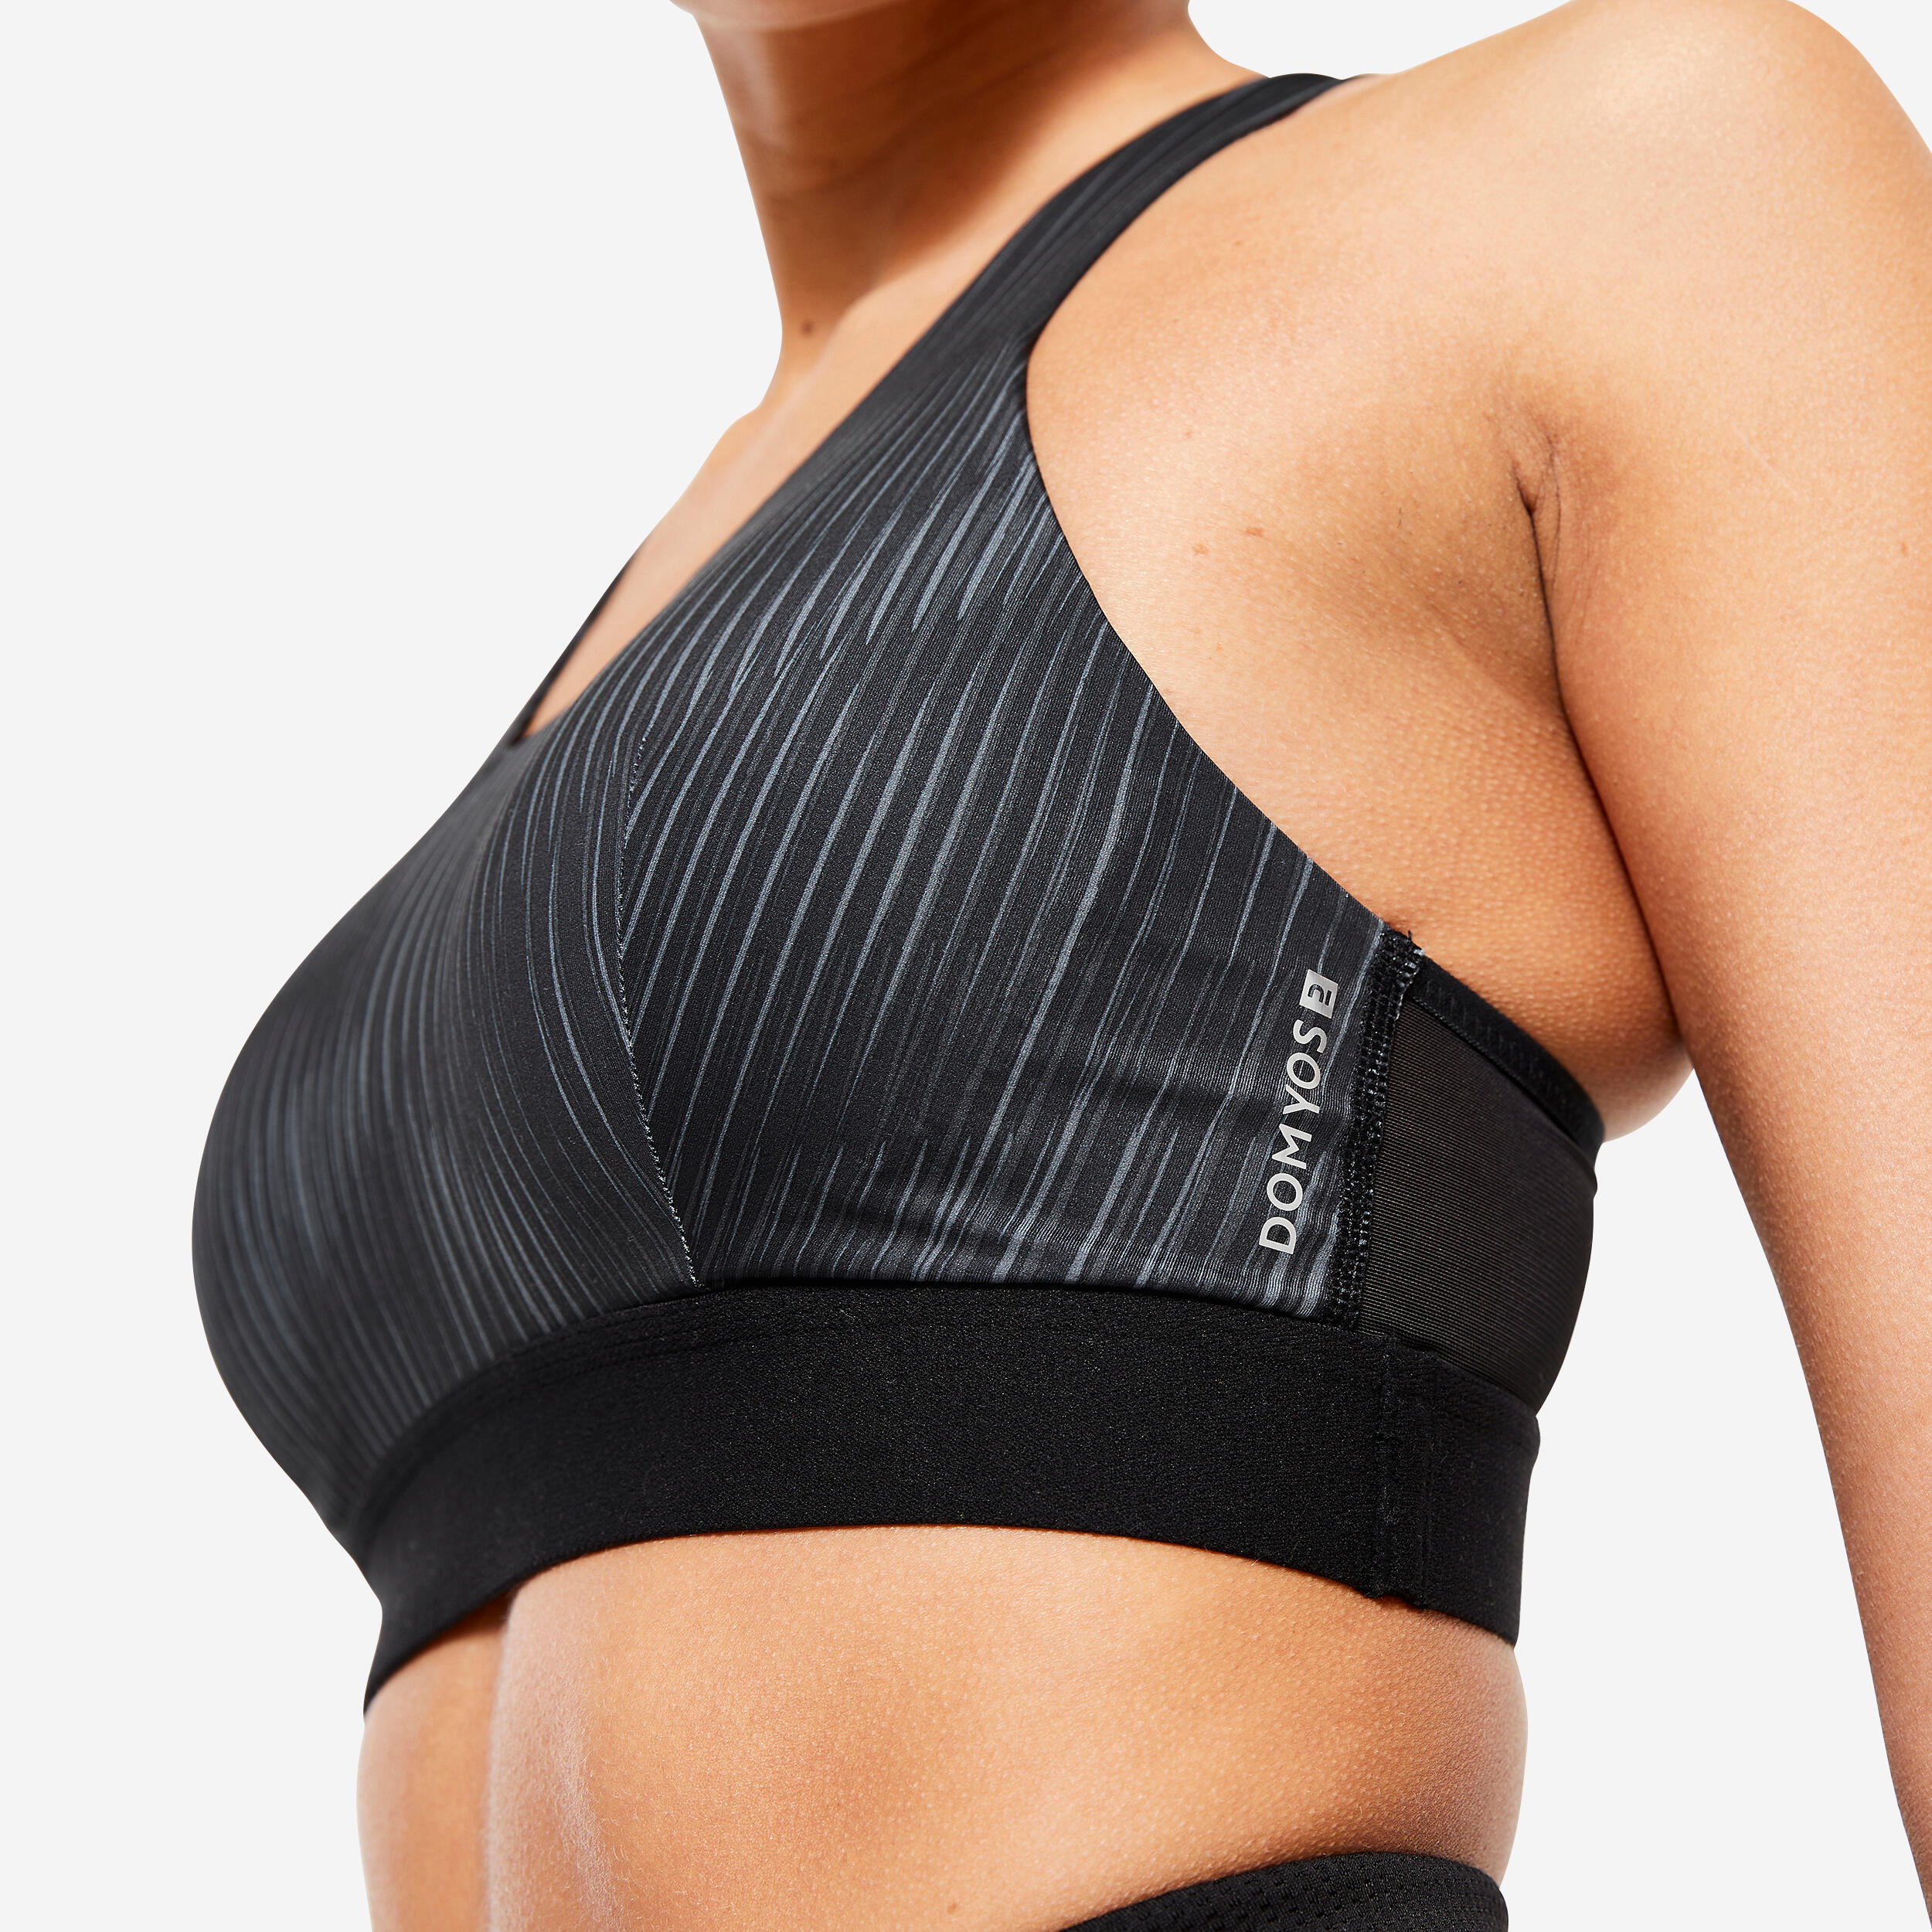 Women's Medium Support Racer Back Sports Bra with Cups - Black/Grey 4/5